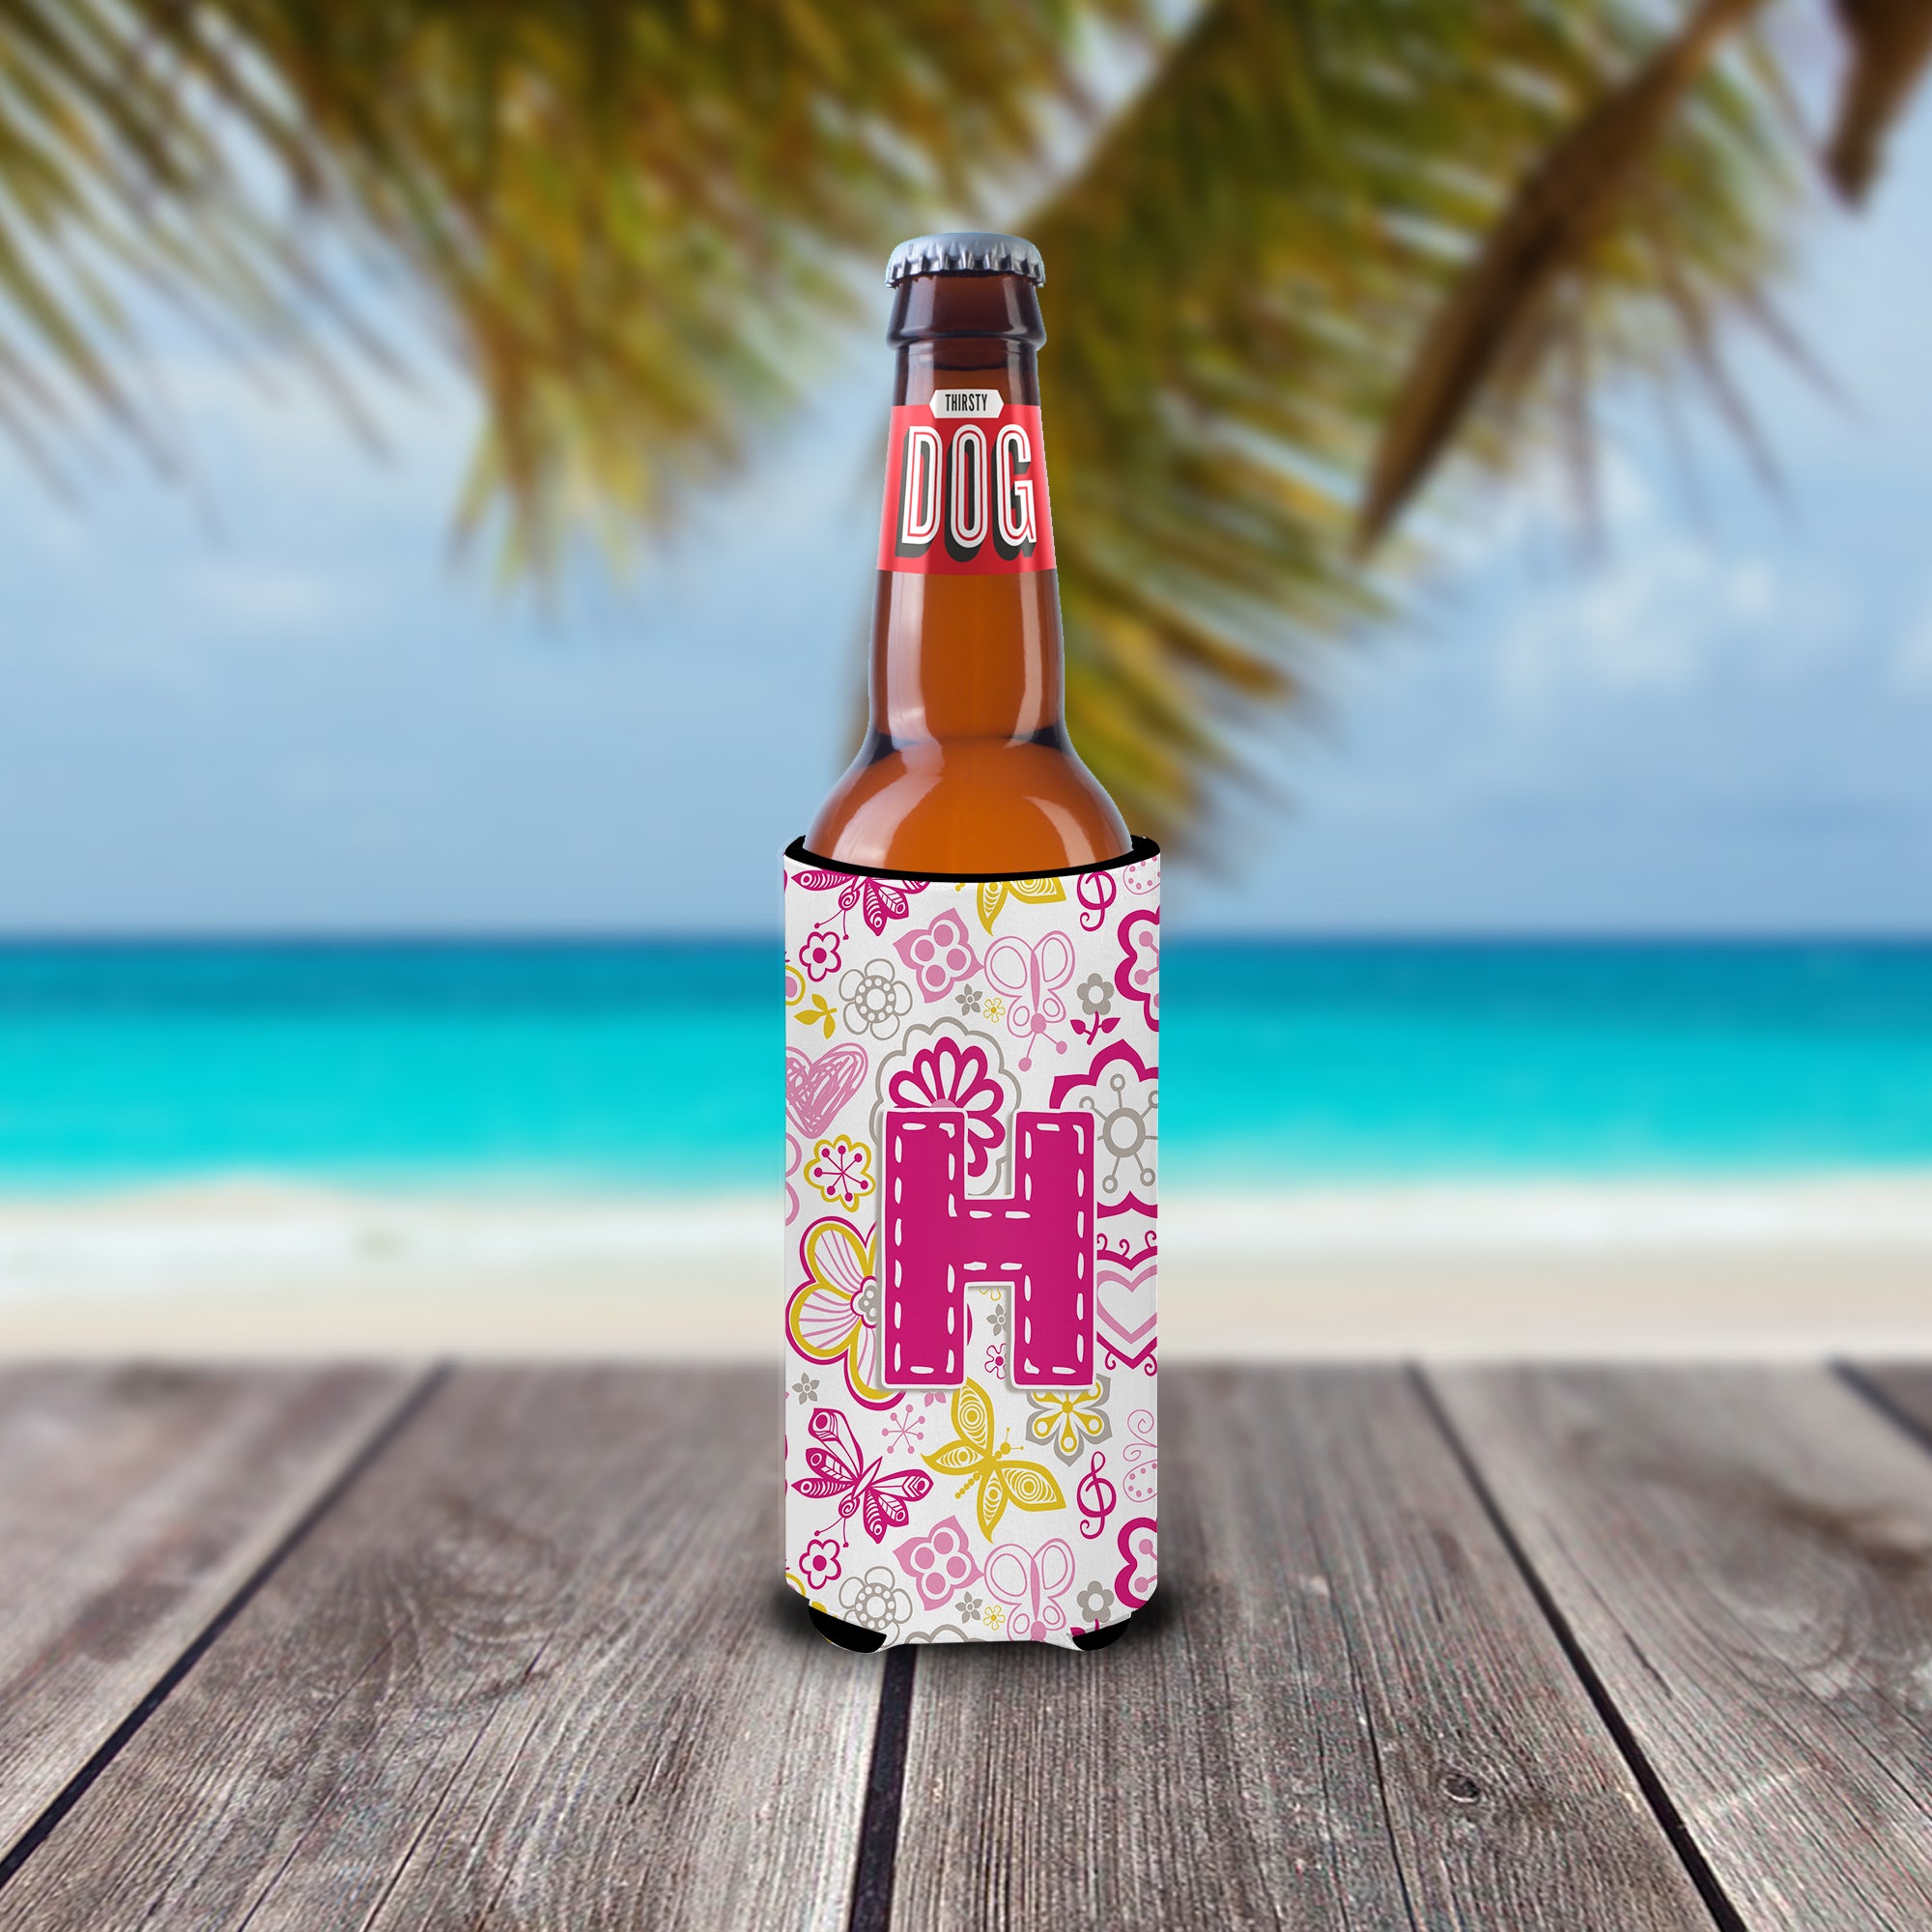 Letter H Flowers and Butterflies Pink Ultra Beverage Insulators for slim cans CJ2005-HMUK